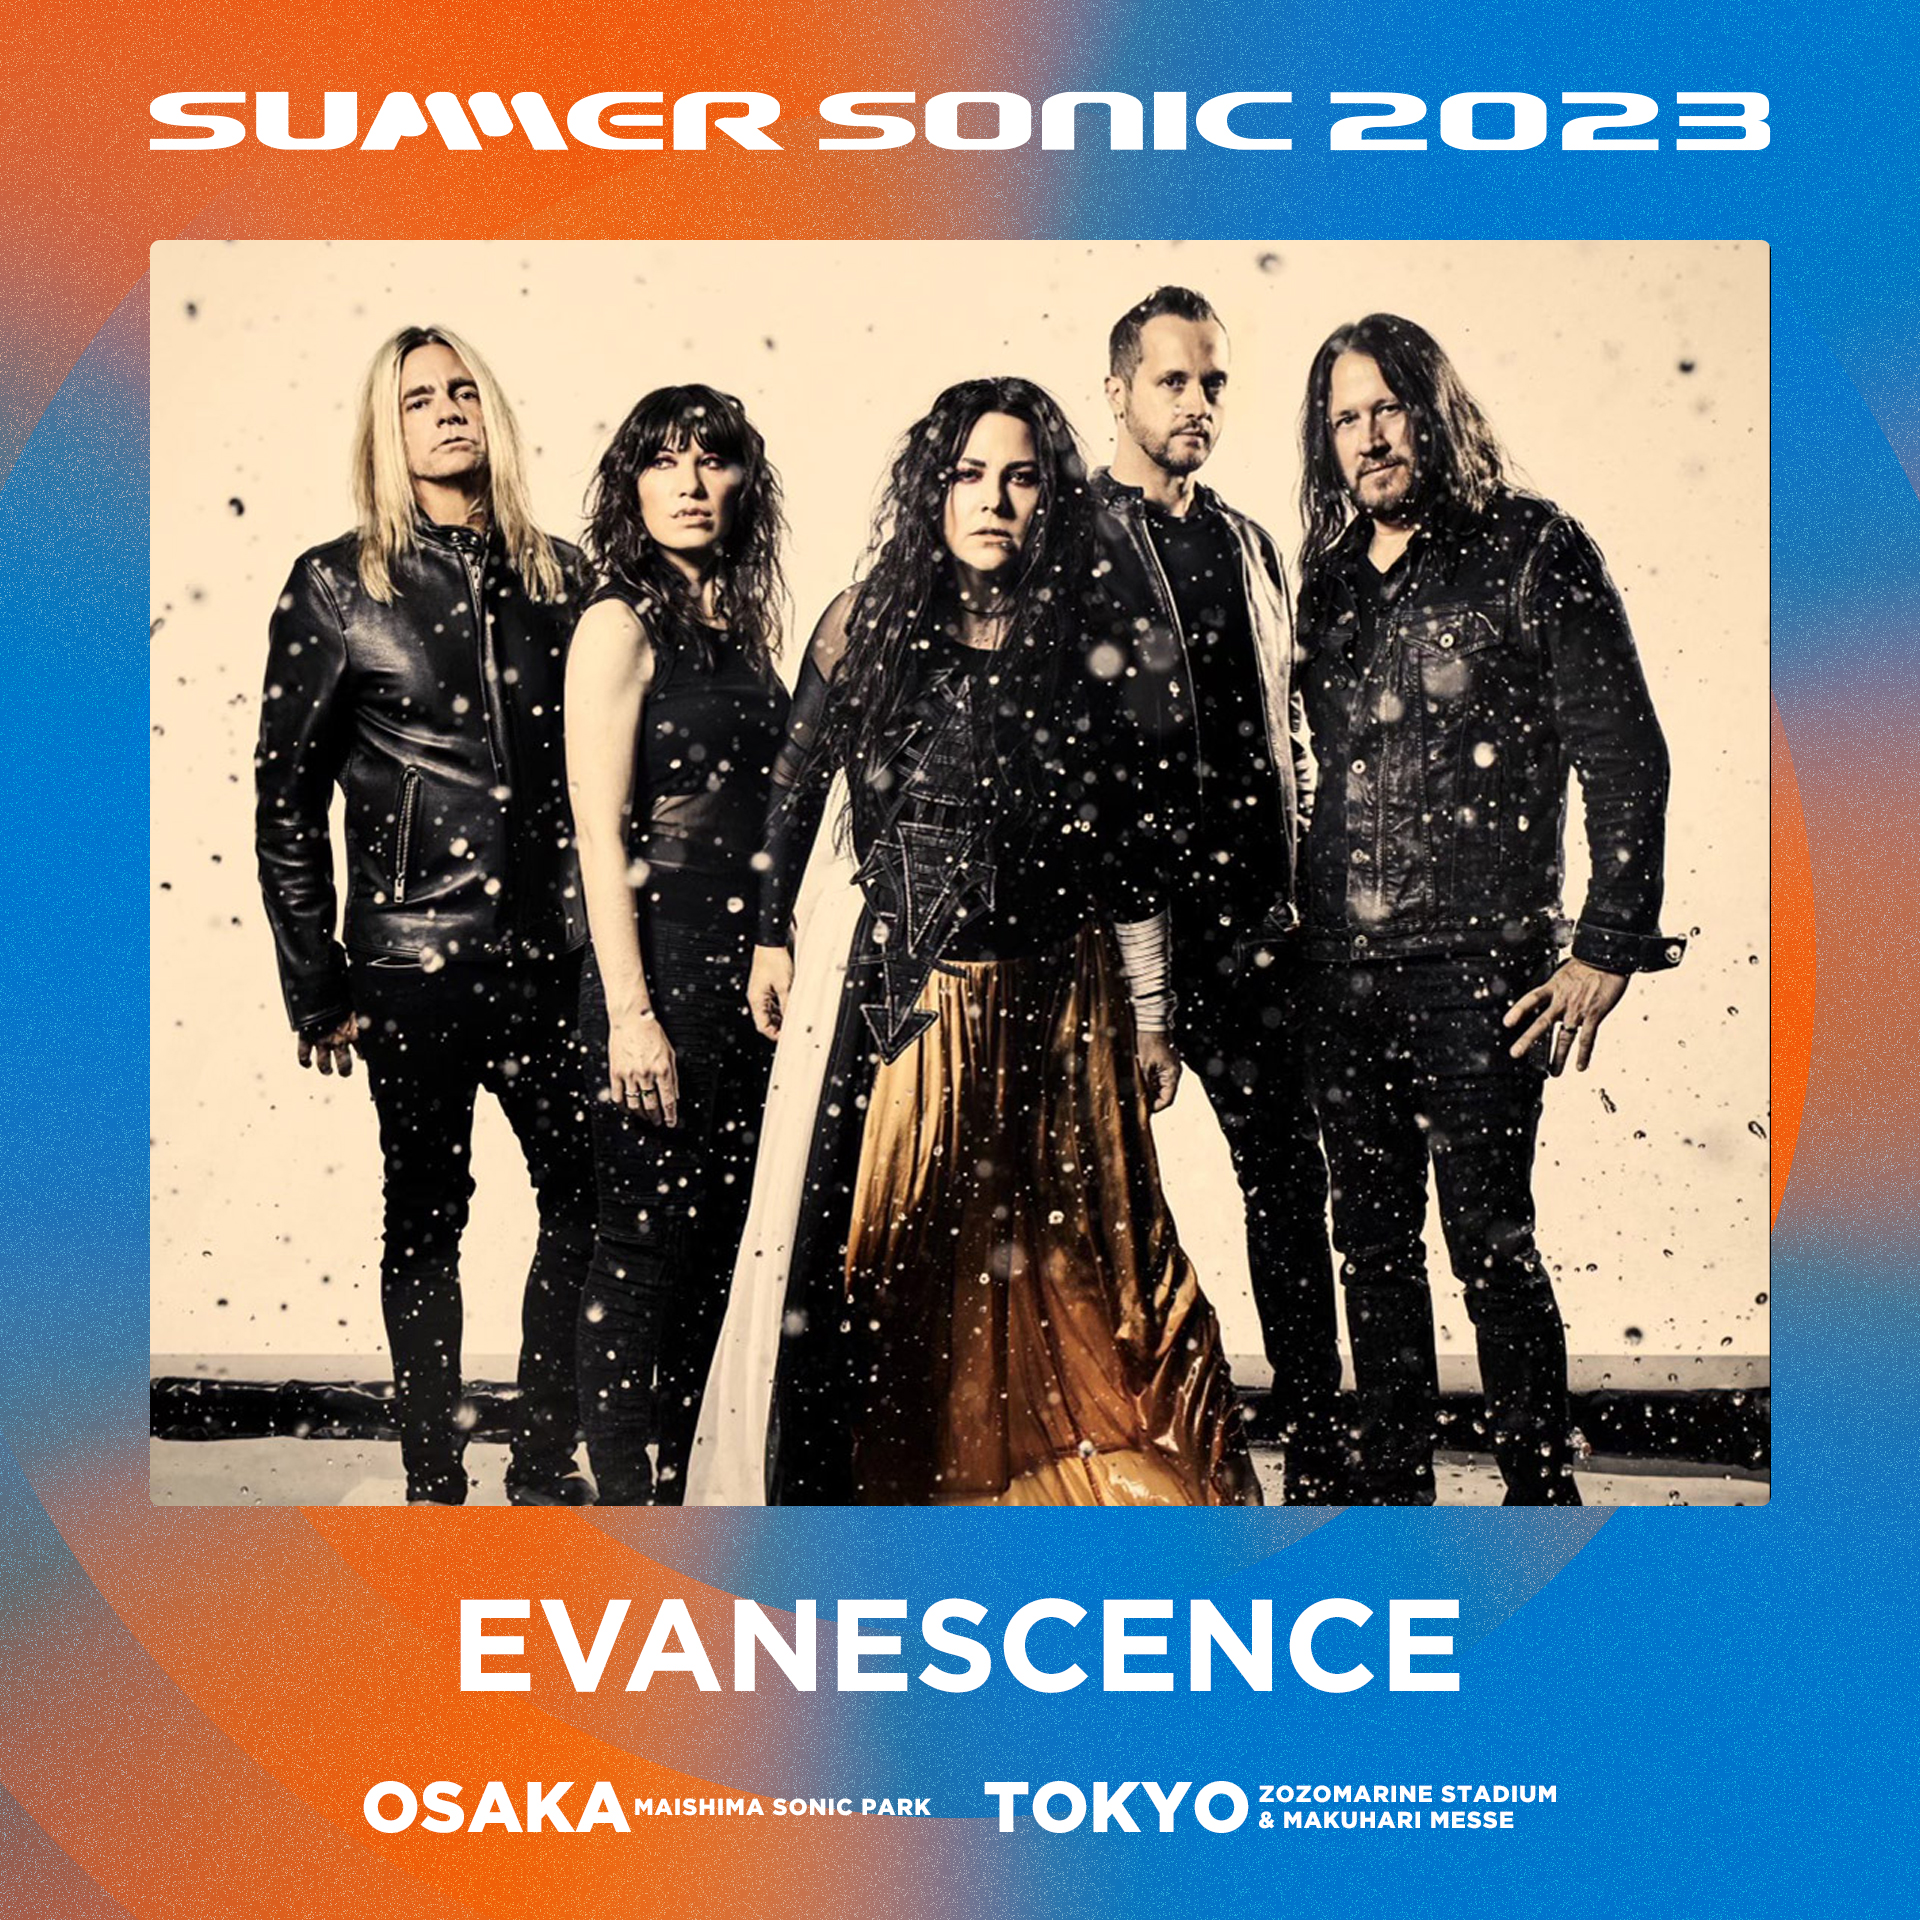 Evanescence to head to Japan for Summer Sonic - Evanescence